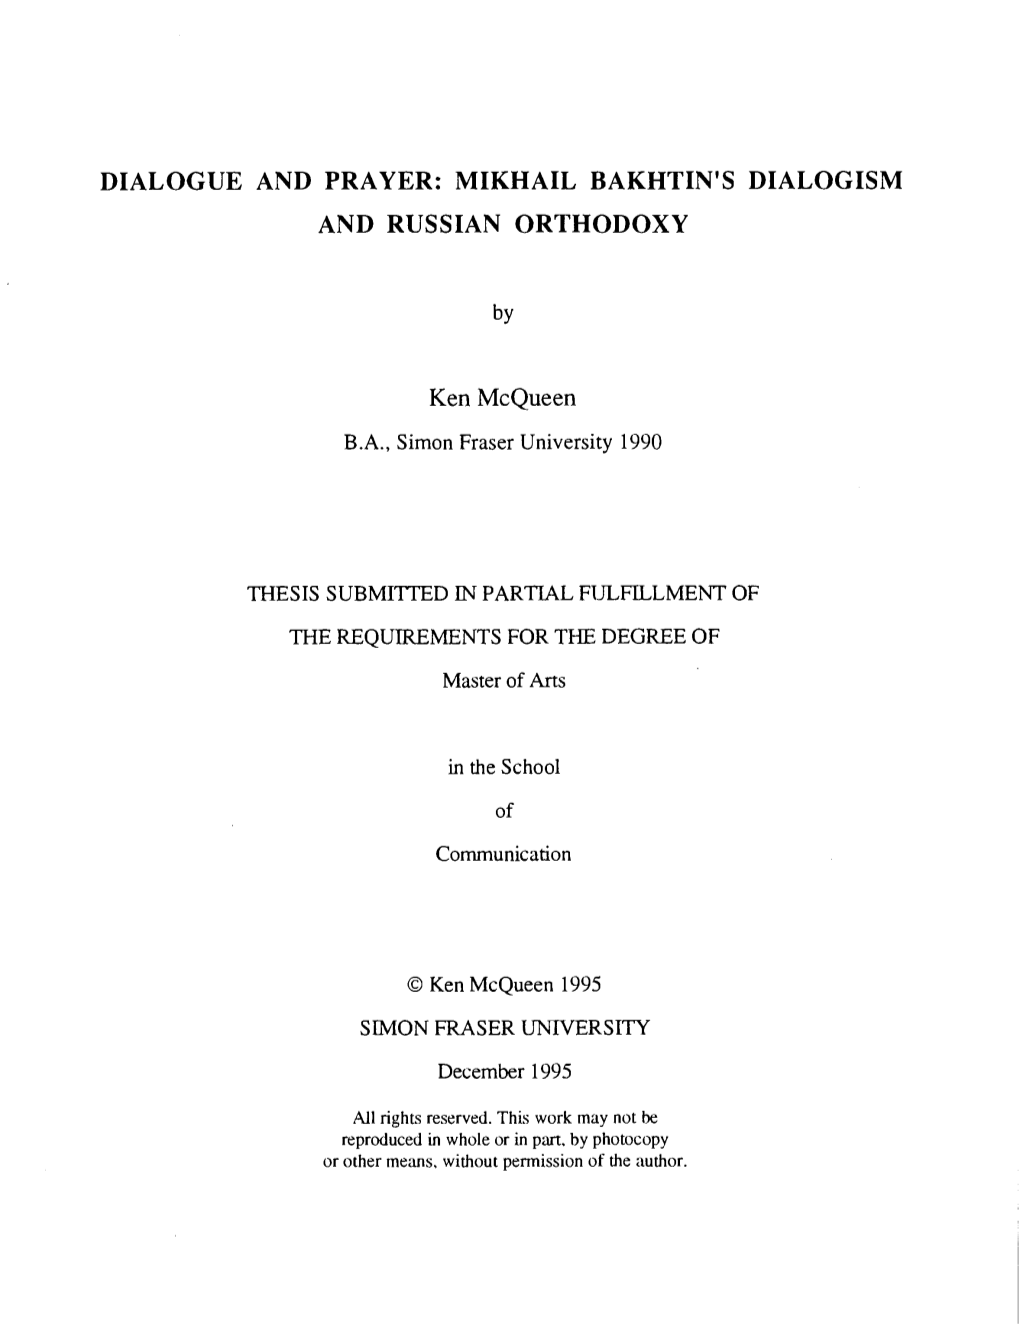 Mikhail Bakhtin's Dialogism and Russian Orthodoxy